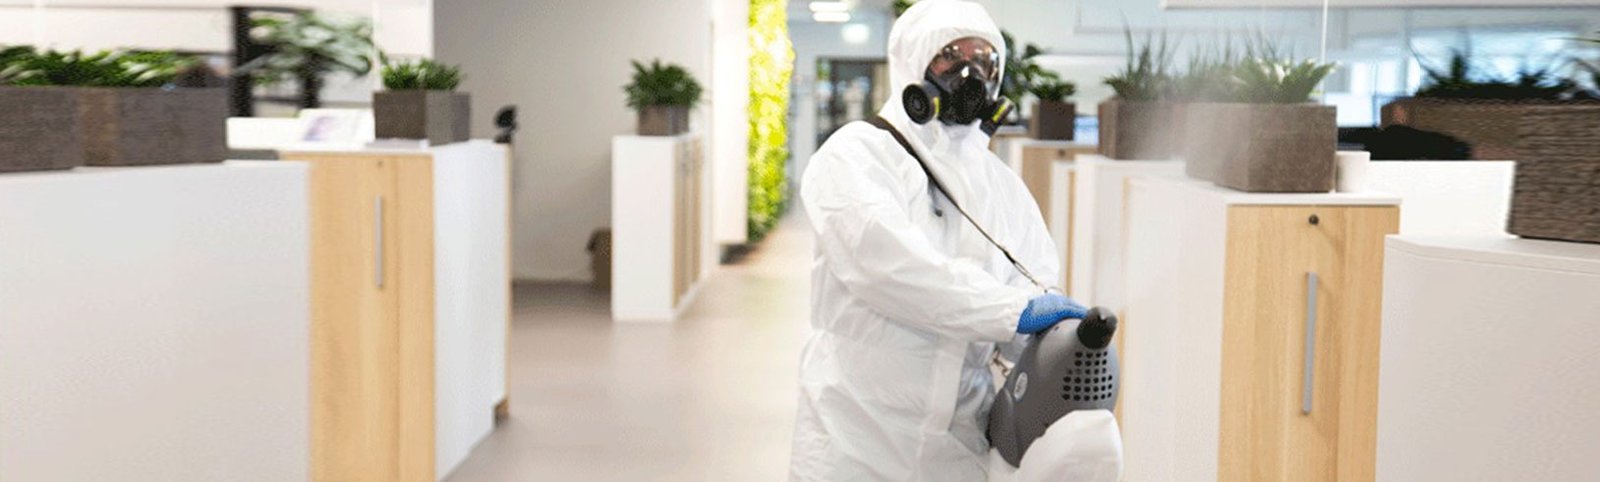 Disinfection and Decontamination Services